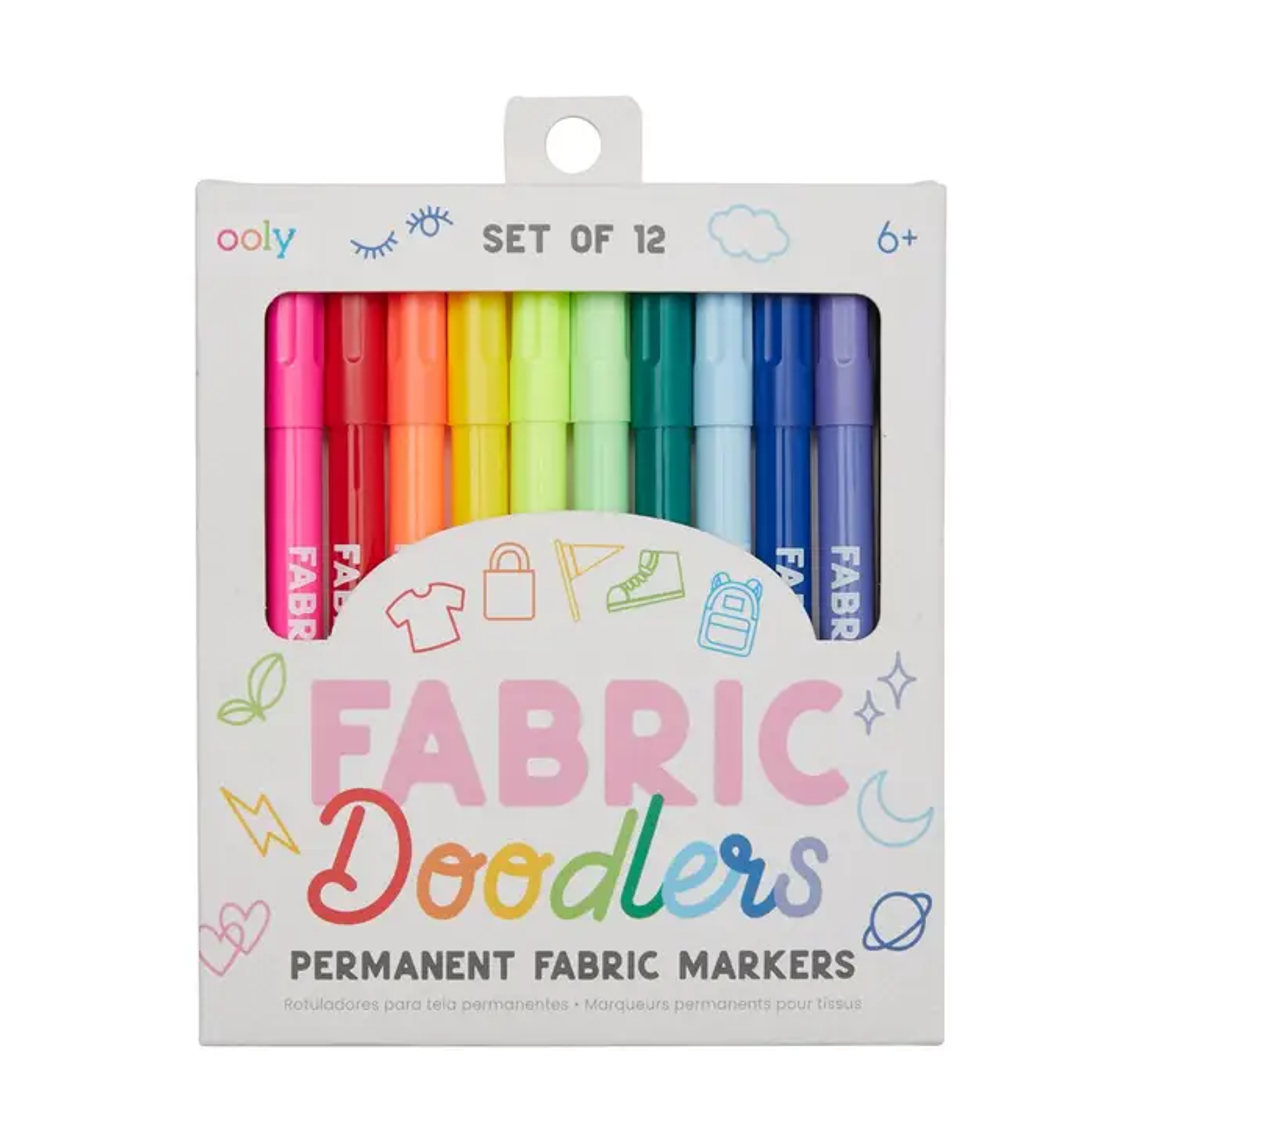 Fabric Doodlers Markers Set of 12 Ooly